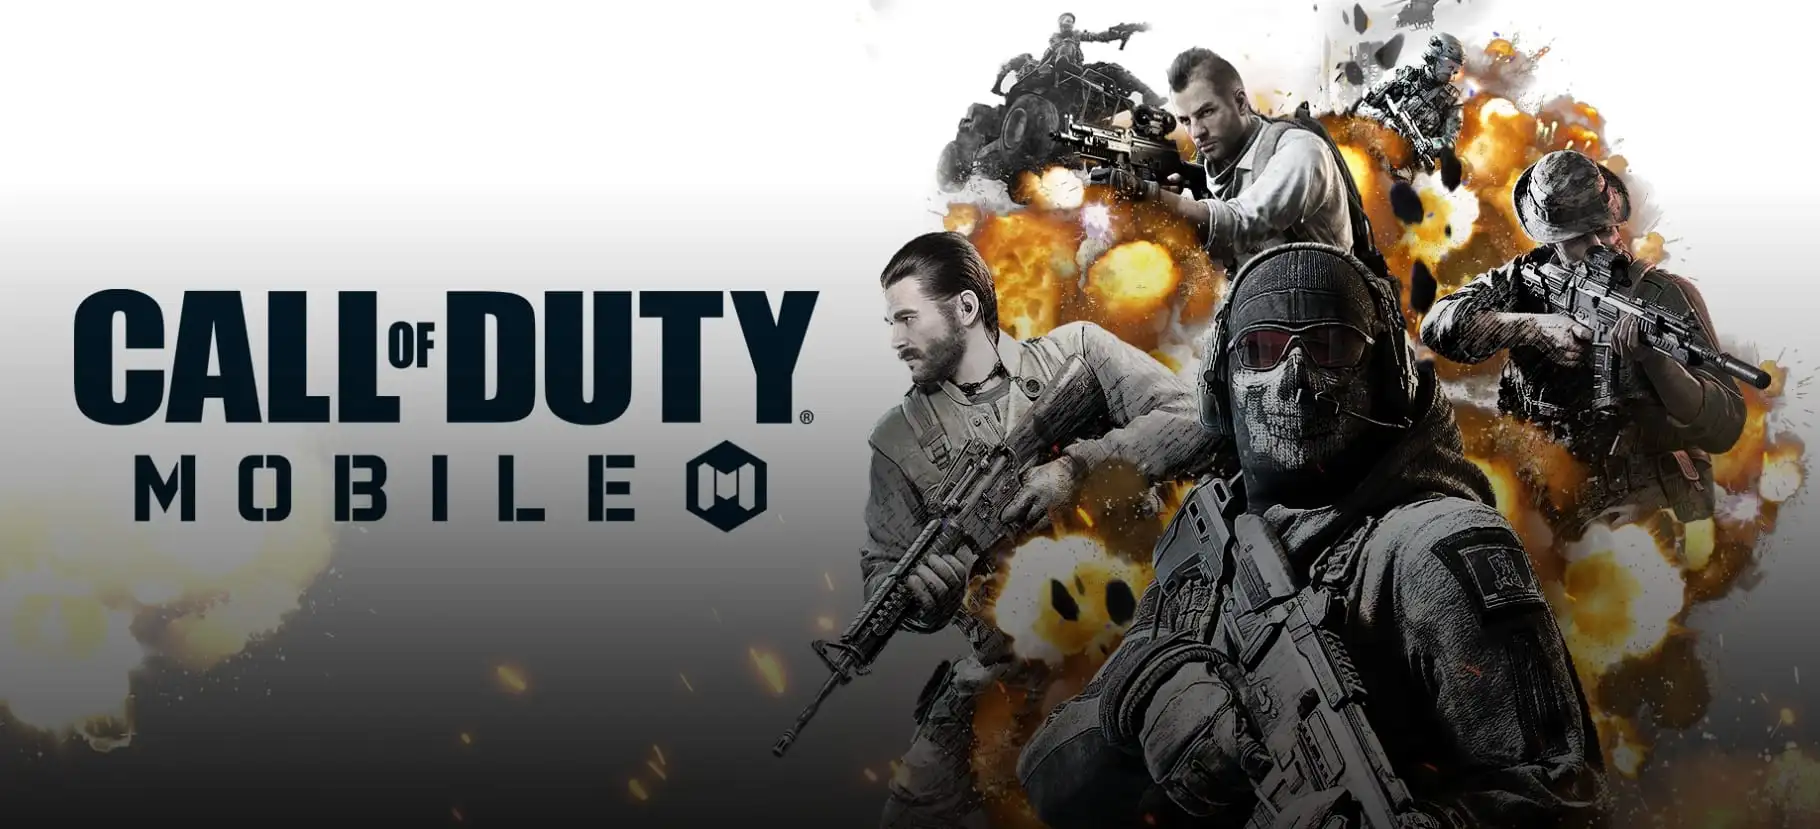 Call of Duty: Mobile out Now and Free-To-Play for iOS and Android